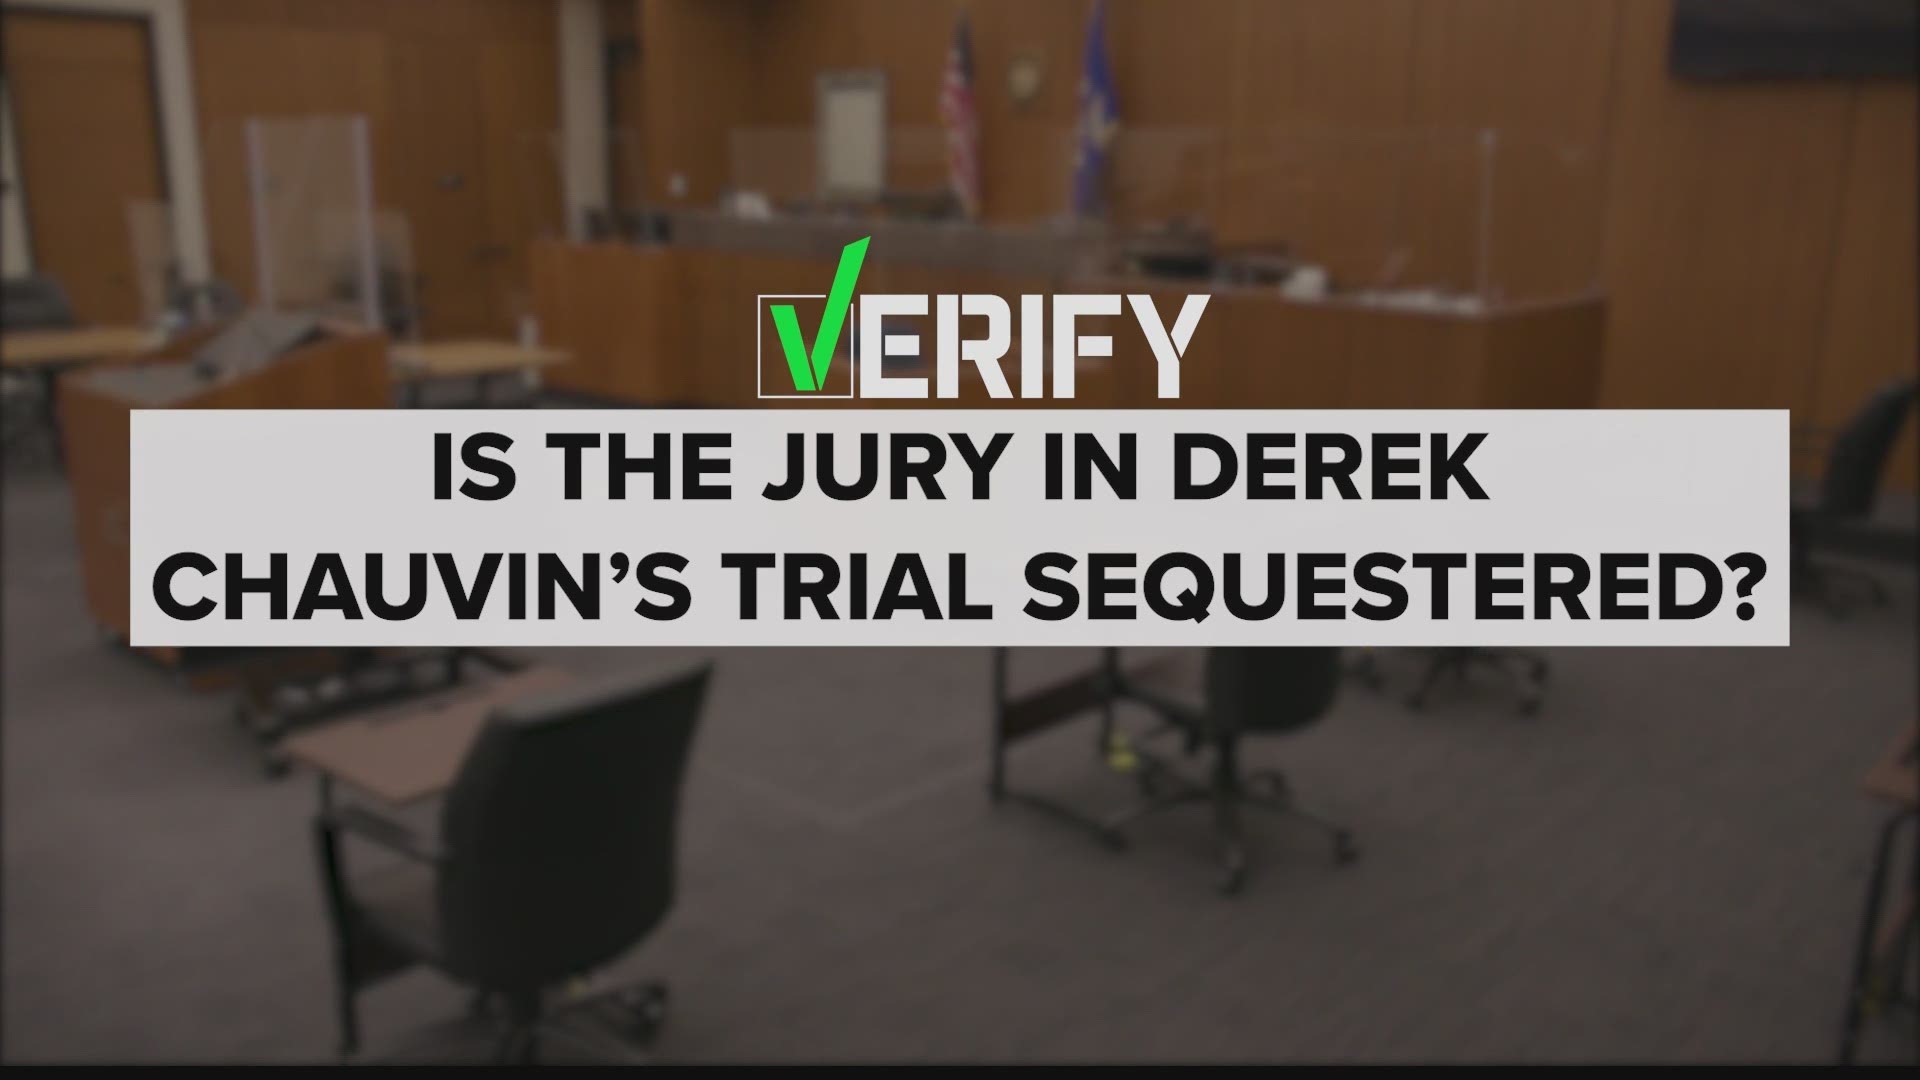 The Chauvin trial jury is currently supervised while in the courthouse but can return home at night. They’ll be sent to hotels during deliberation.